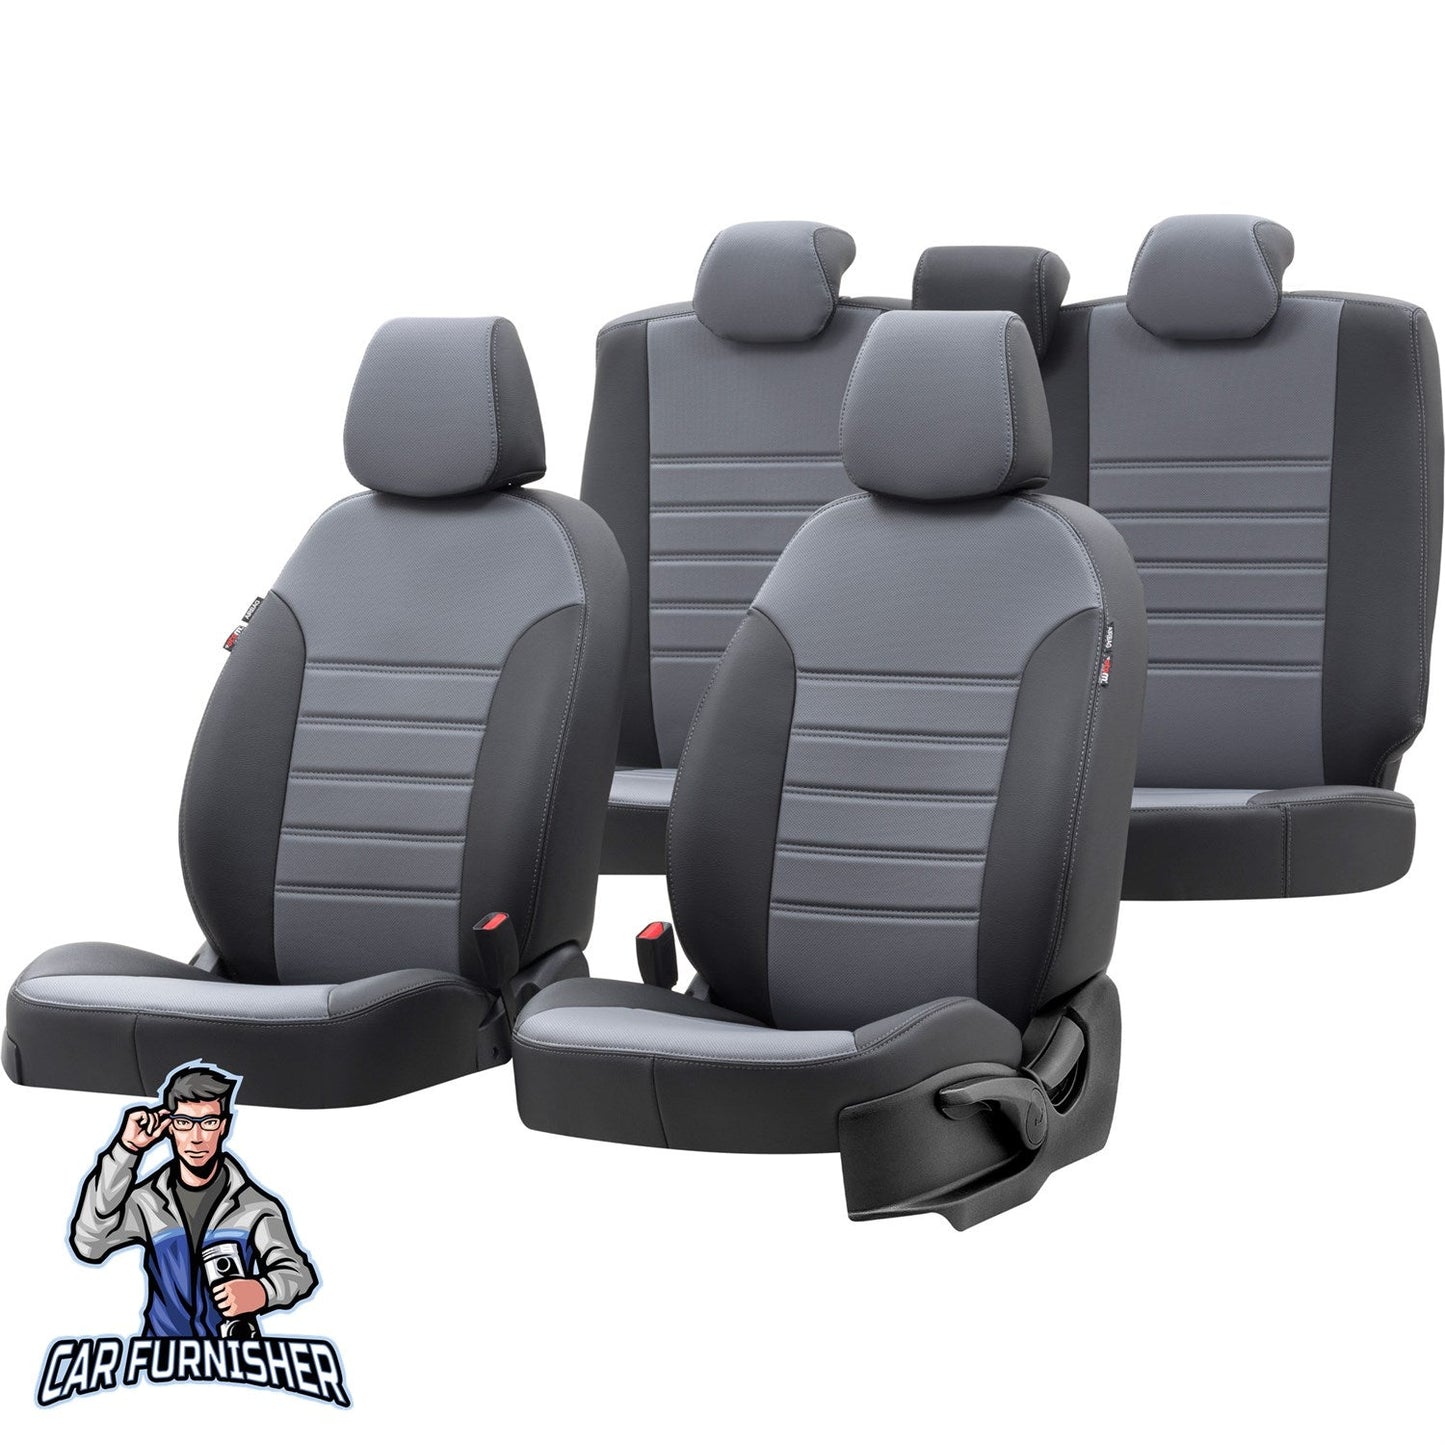 Mitsubishi Colt Seat Covers Istanbul Leather Design Smoked Black Leather